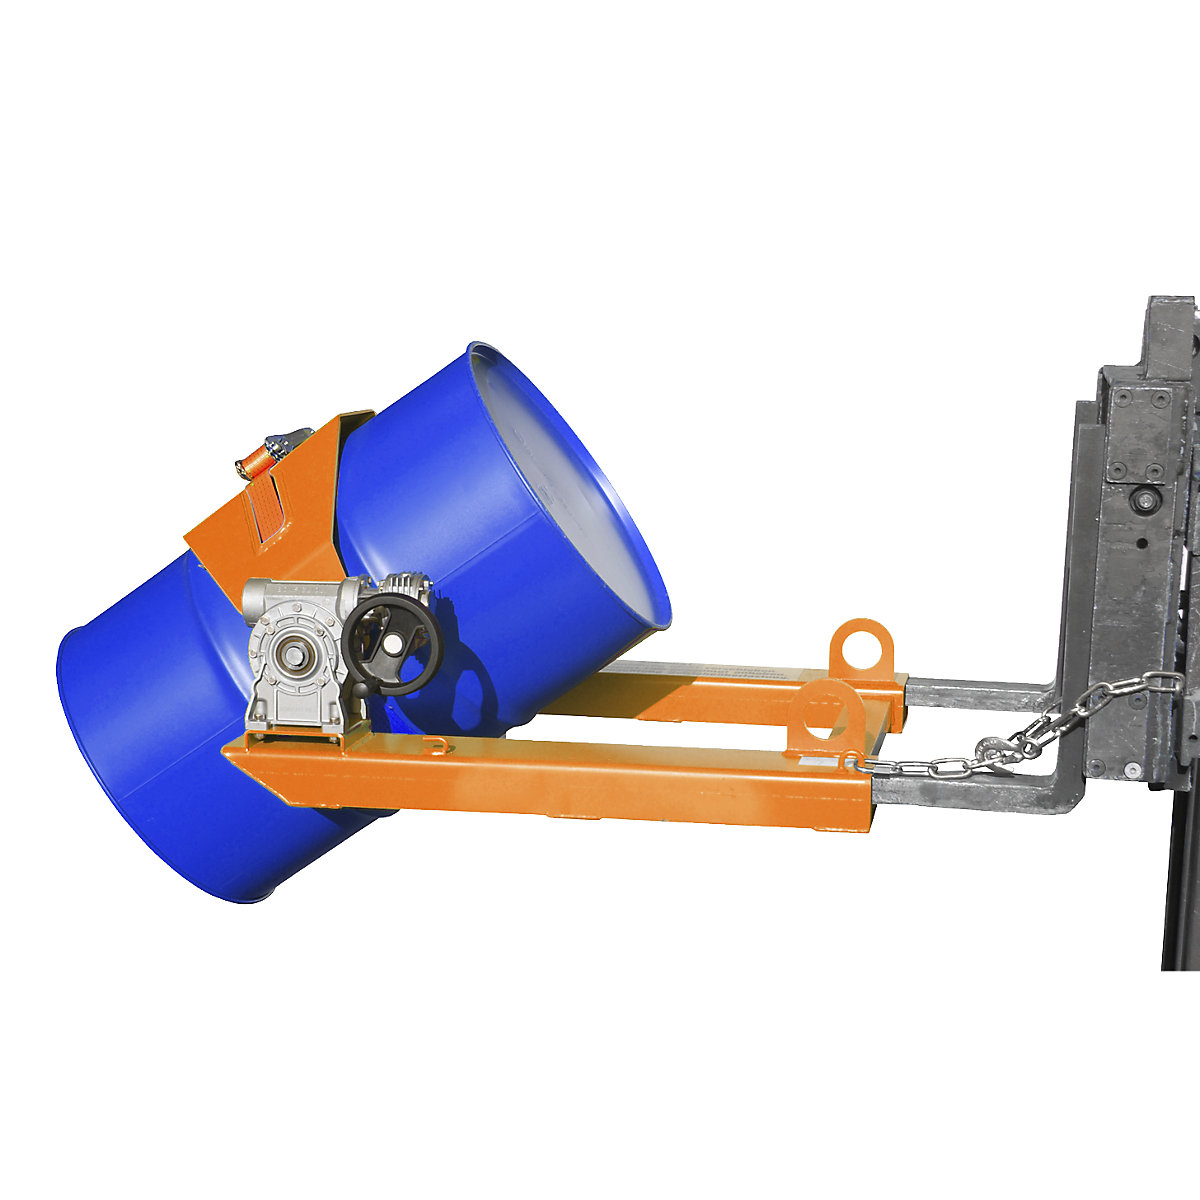 Drum tilting unit – eurokraft pro, for forklift and crane operation, with hand crank, painted yellow orange